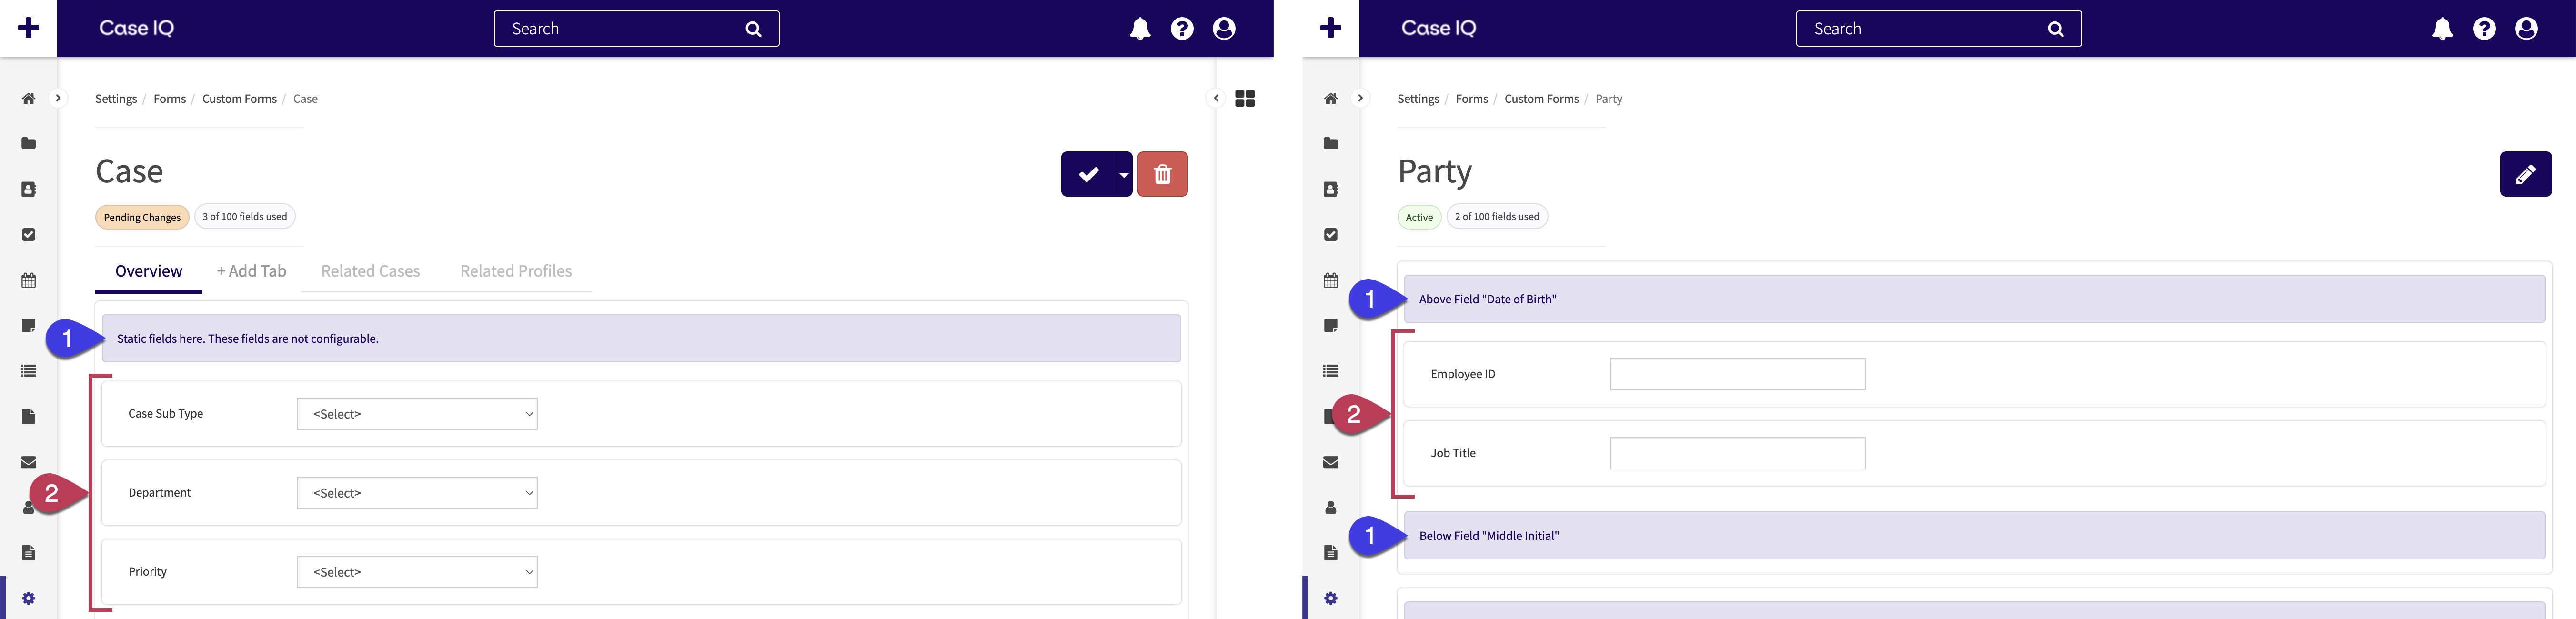 Dynamic and static fields on the case and party form layouts.